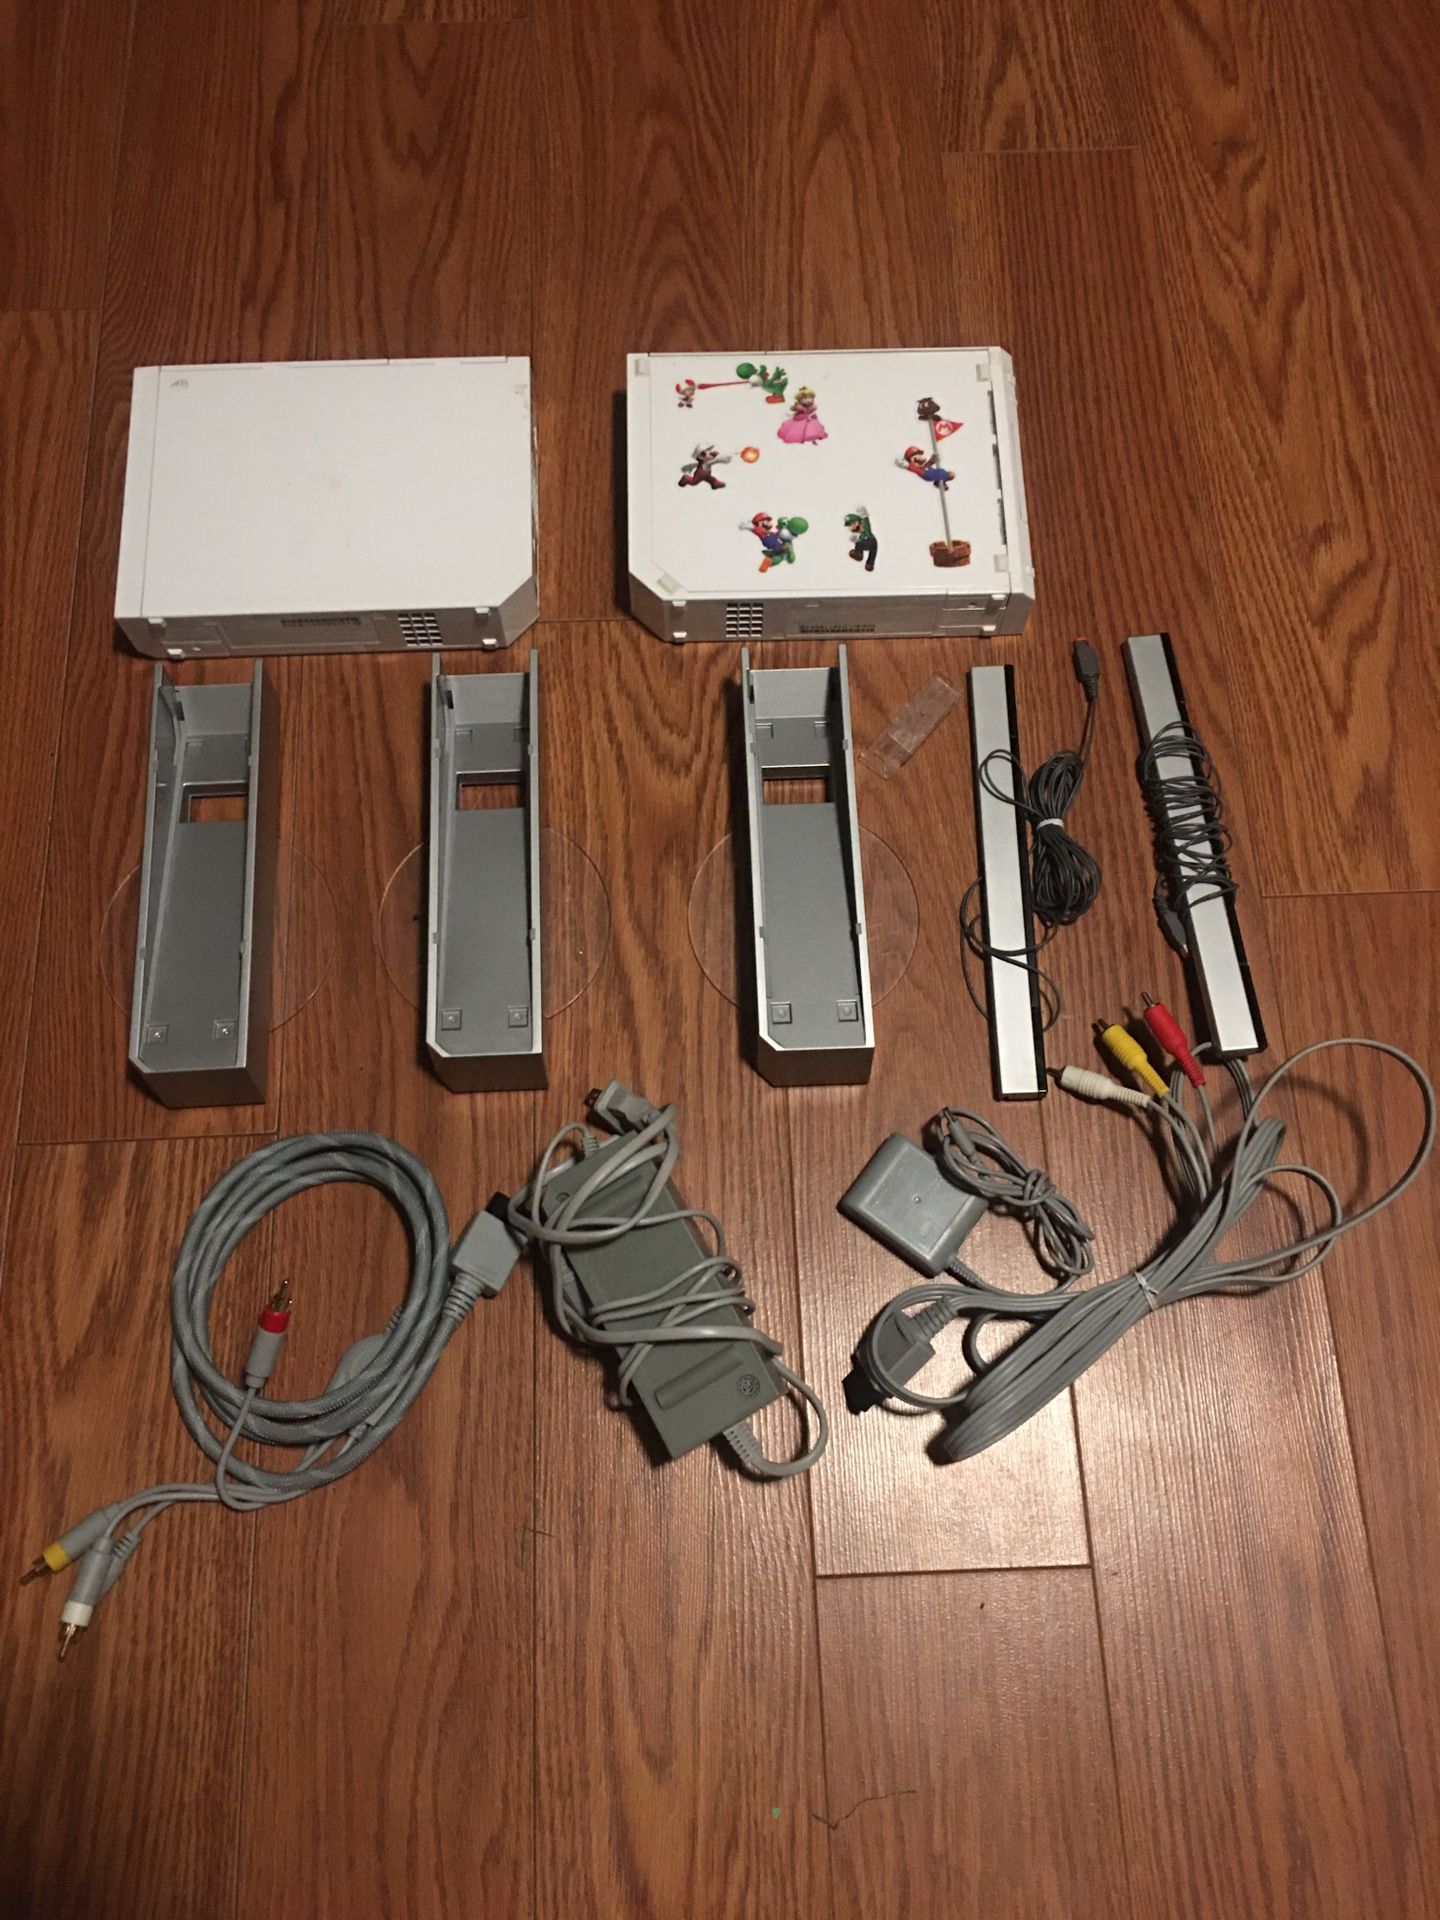 Wii Consoles, Sports Package, Exercise Package, Controllers, Games, Extra Parts, And A Wii Disney Set.